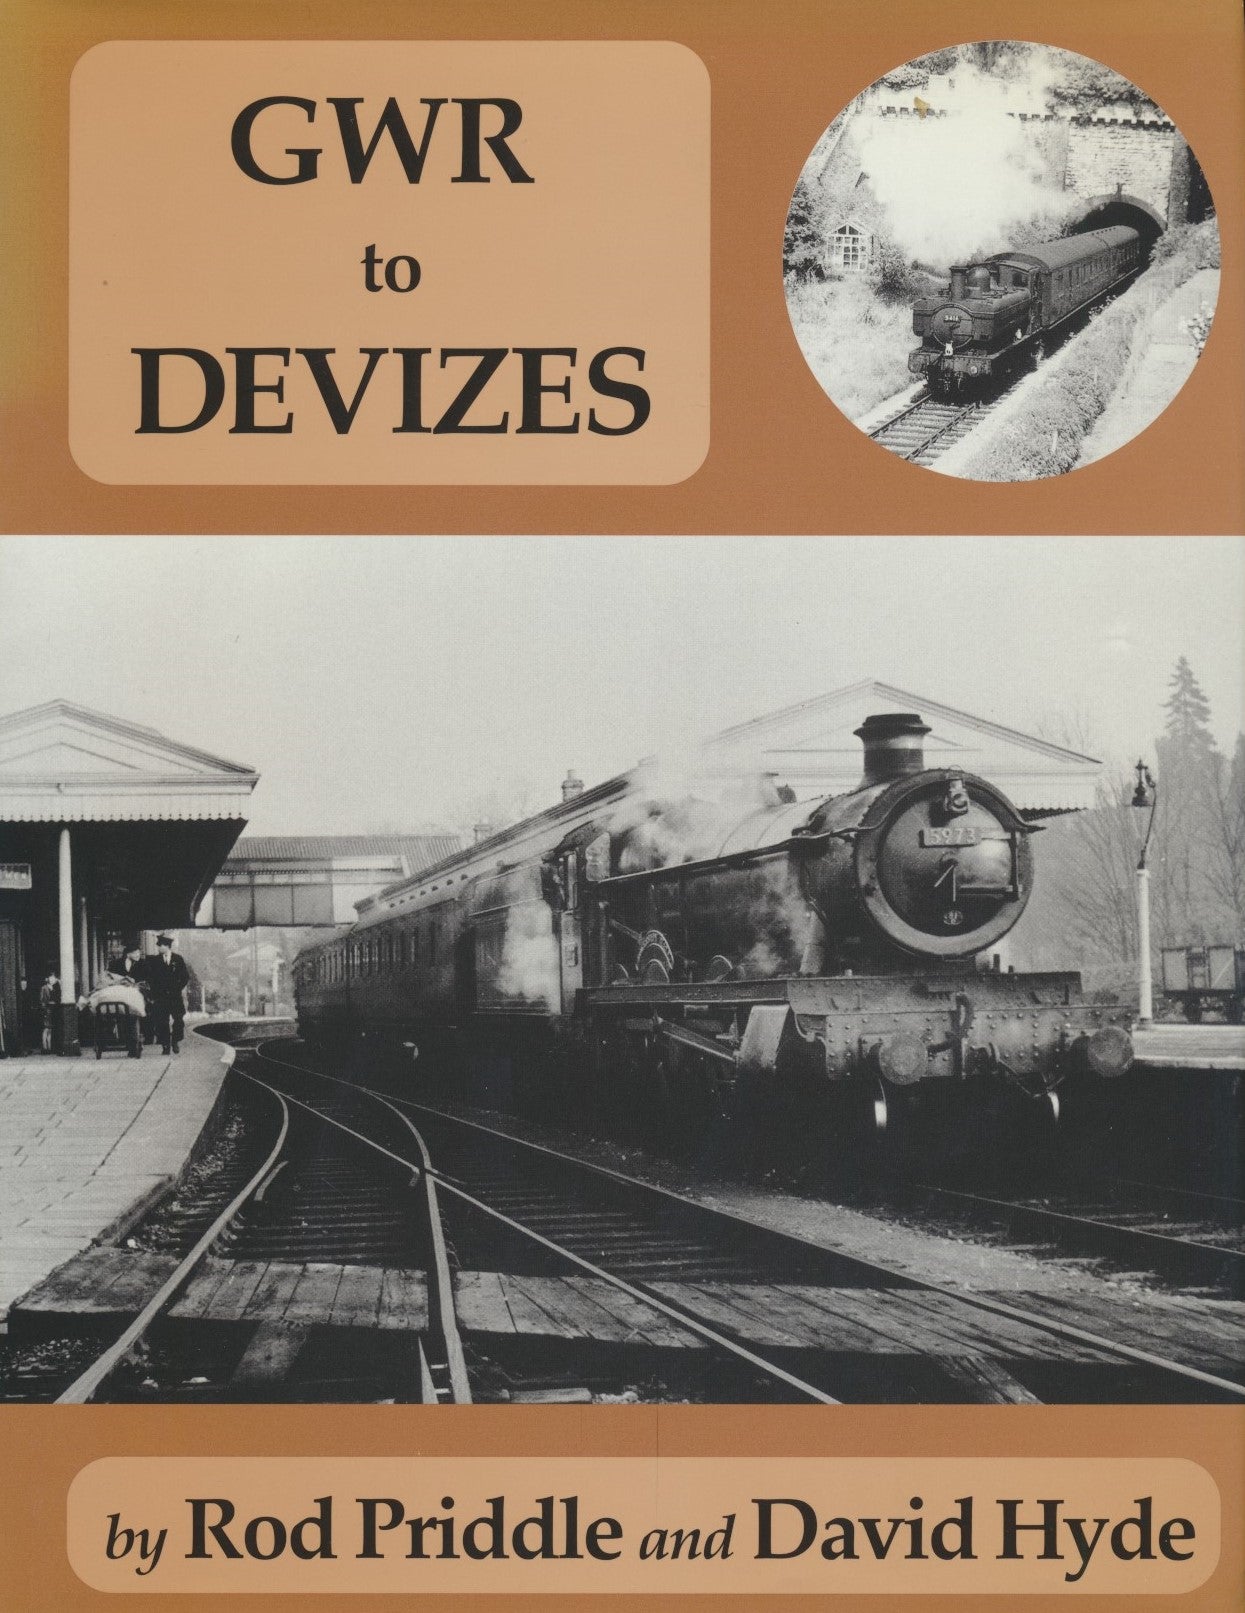 GWR to Devizes